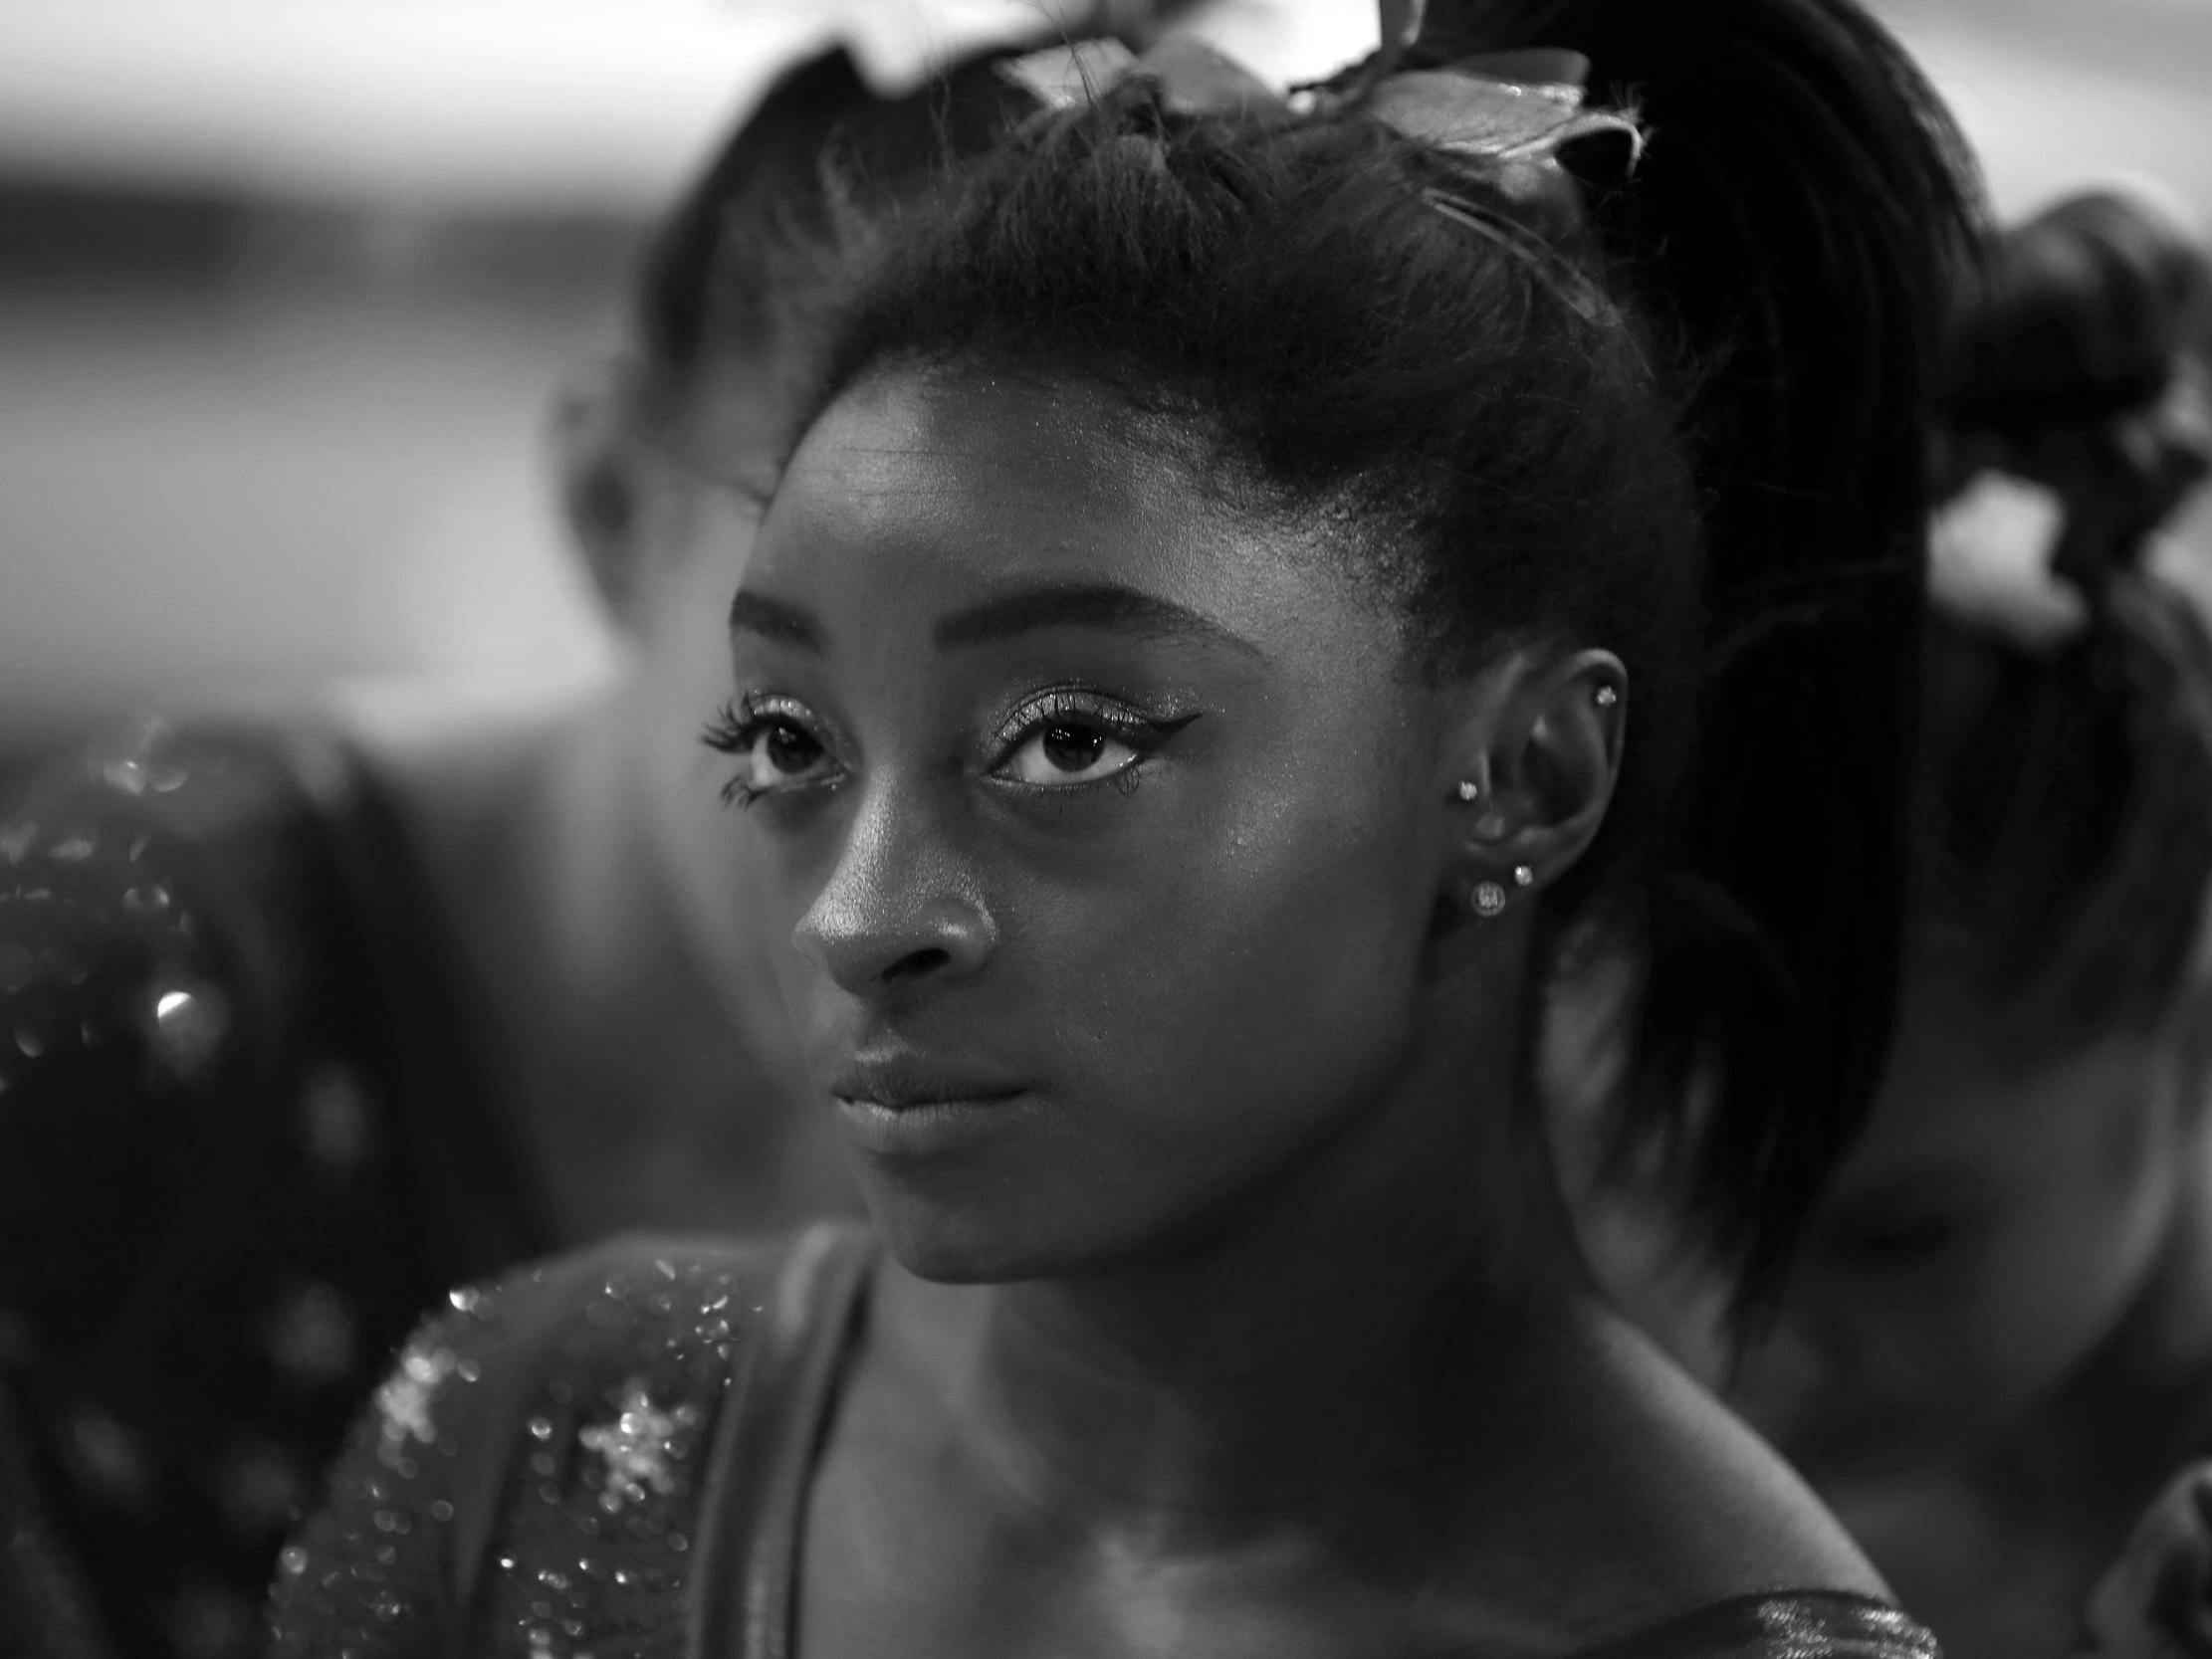 What’s left for Biles? Only the still-untouched boundaries of her own athletic capacity